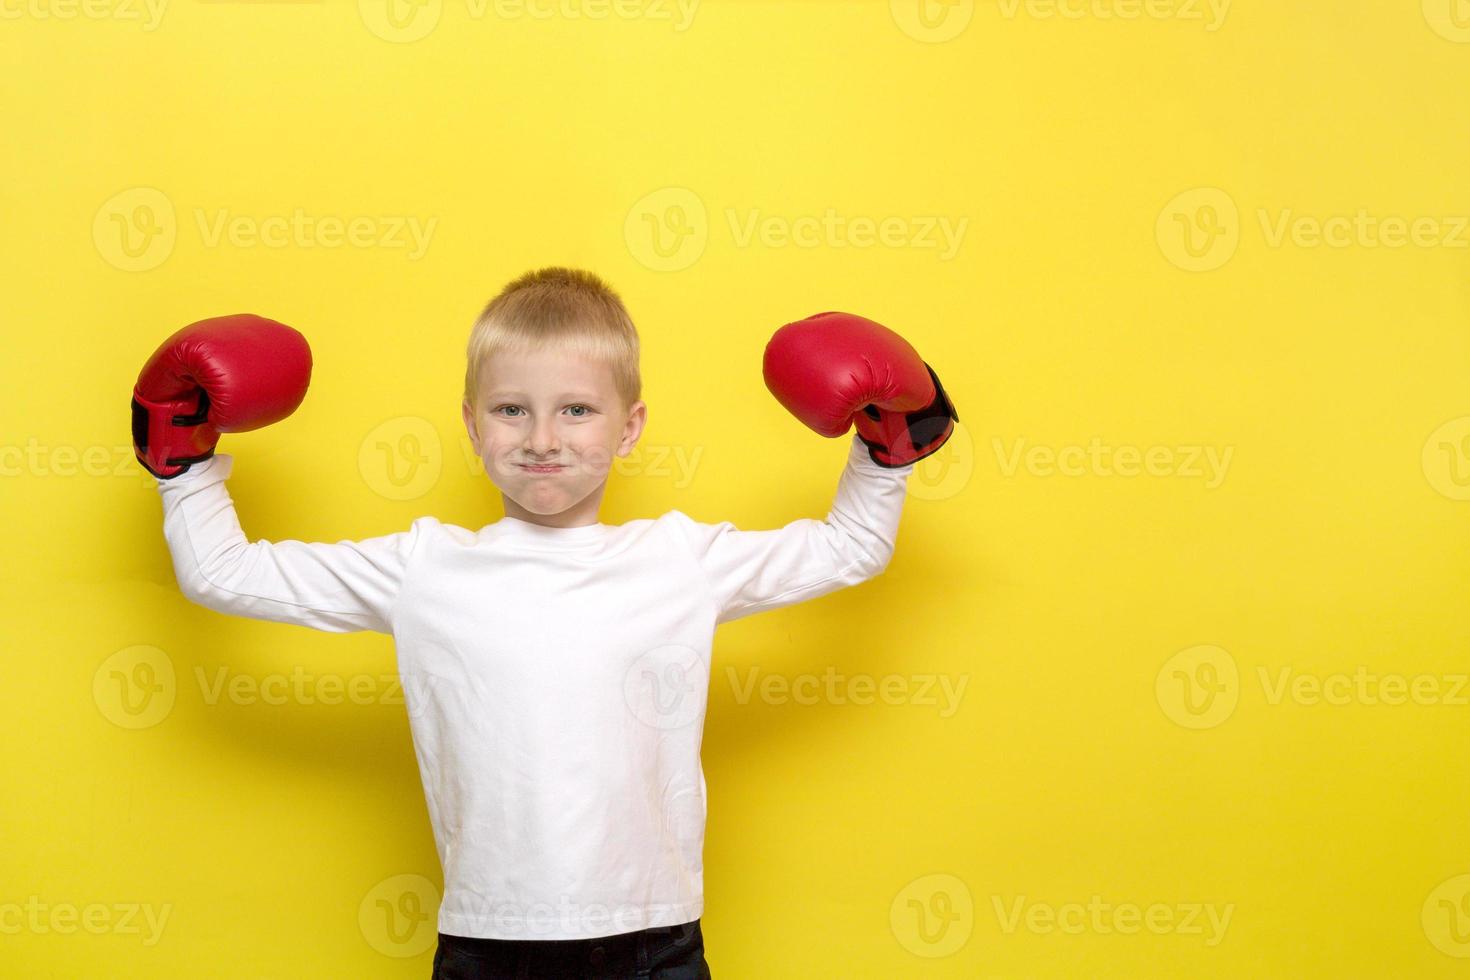 blond boy in red boxing gloves depicts a boxer raising his hands puffing out his cheeks on a yellow background photo